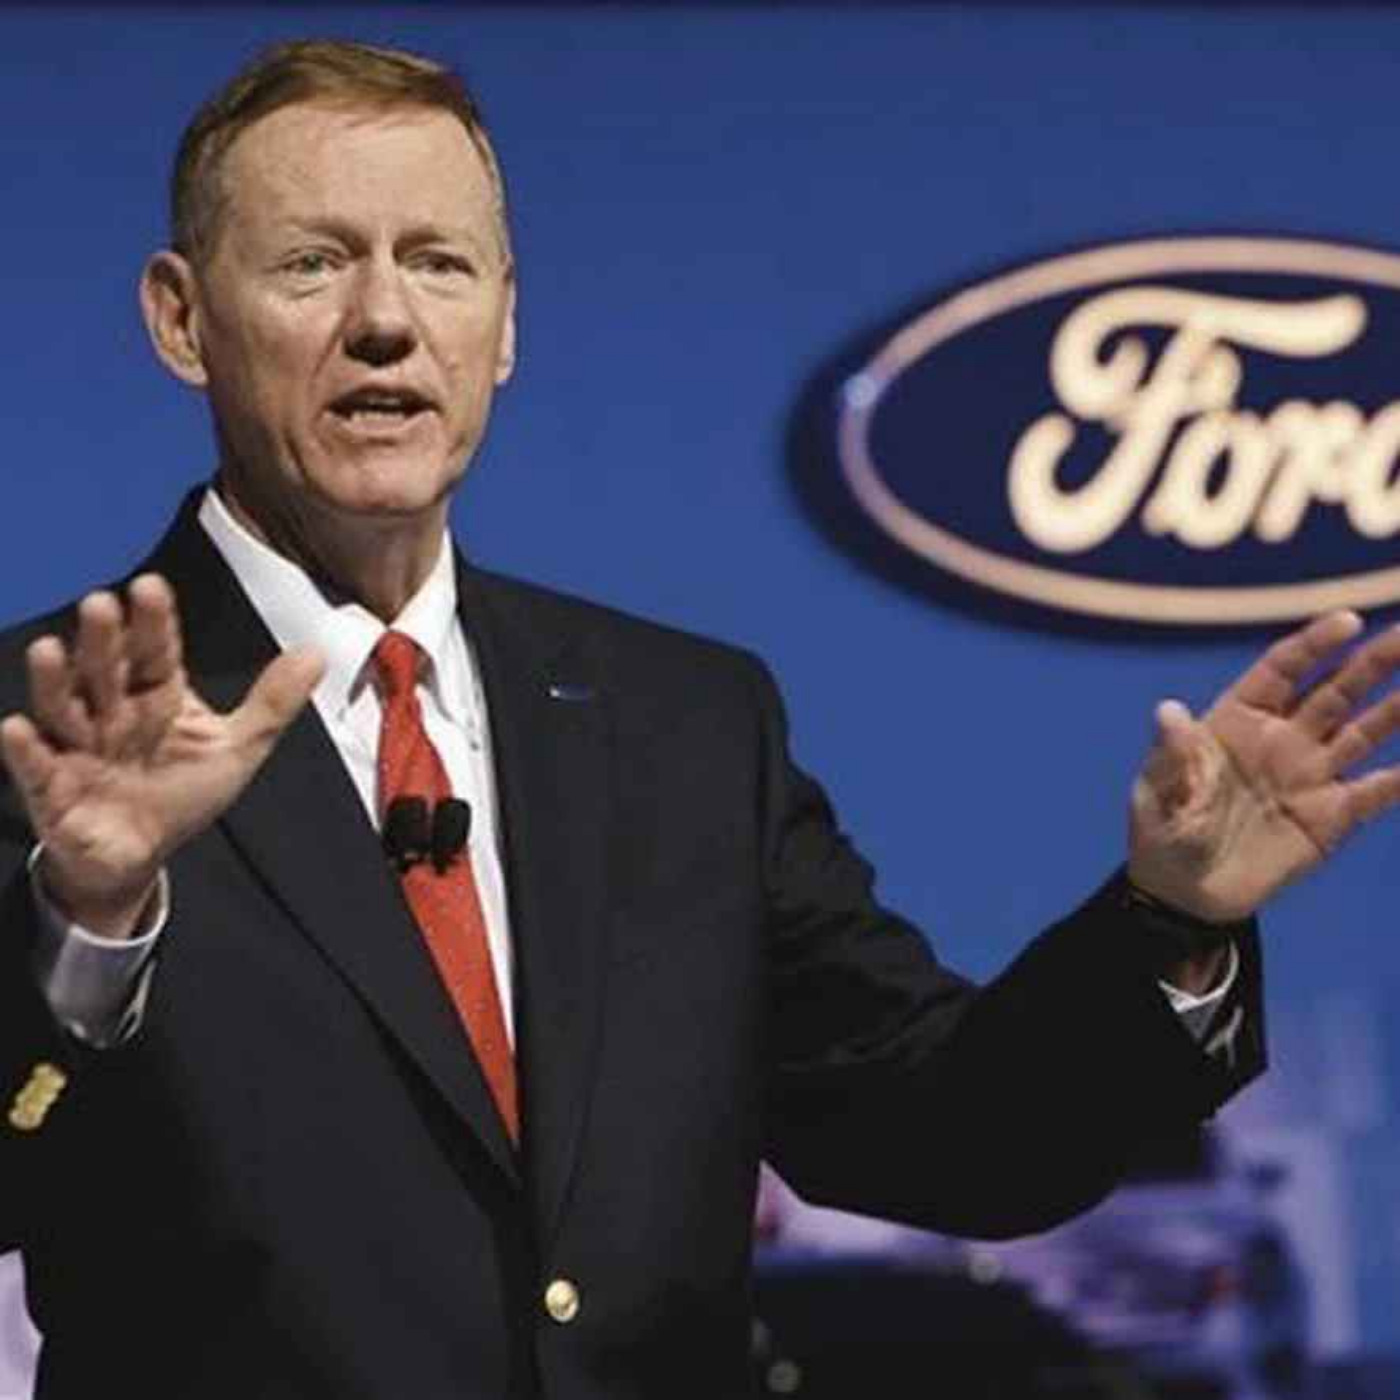 566: The CEO of Ford and Boeing, Alan Mulally: Leadership environmentalism should learn from